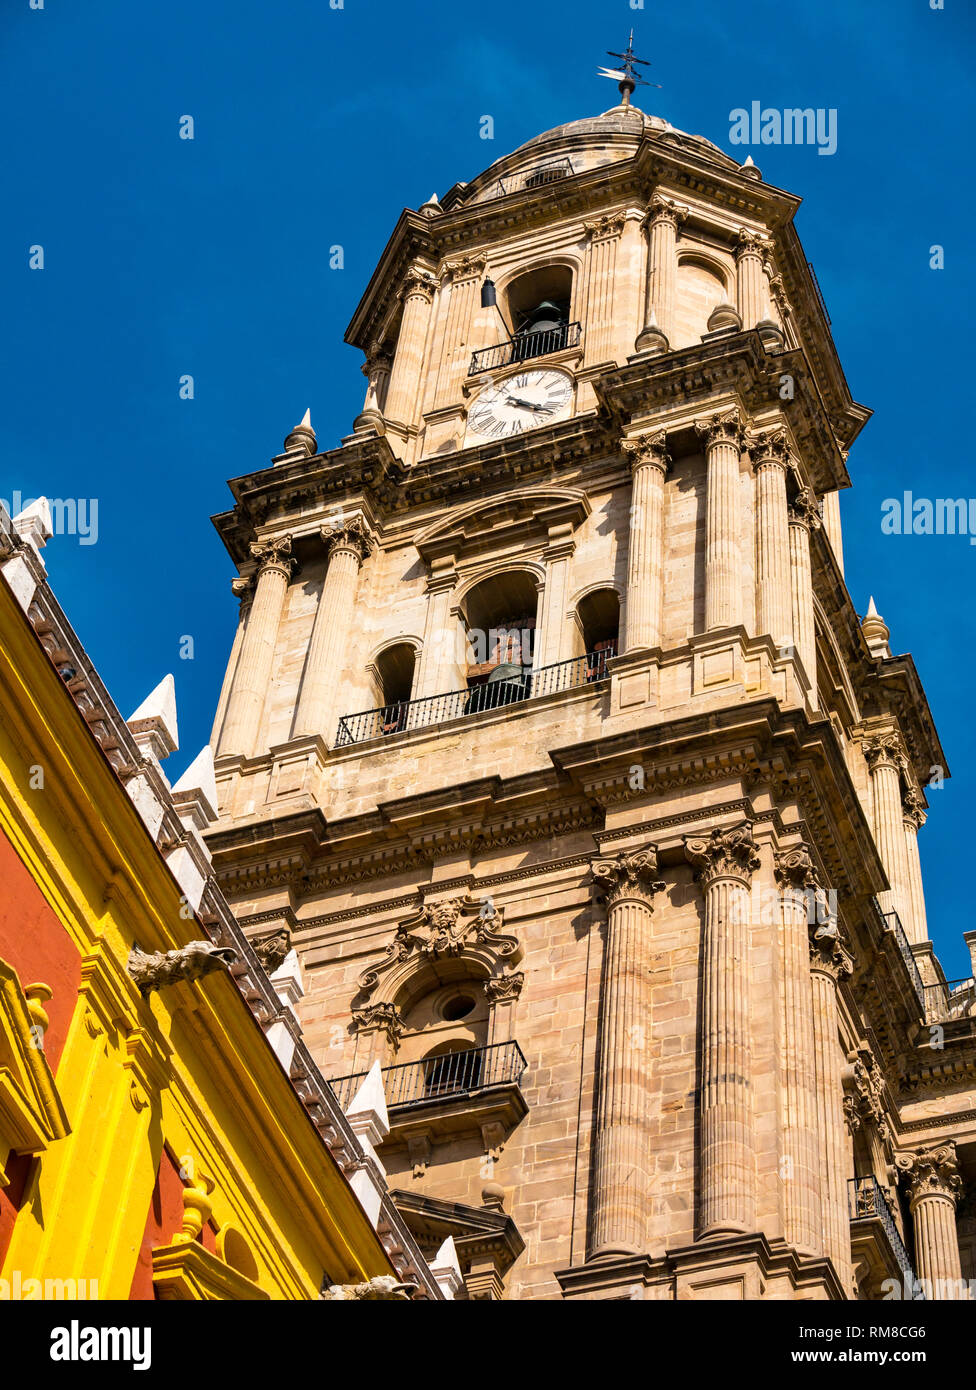 Episcopal Palace, Plaza Obispo and view of  Malaga Cathedral bell and clock tower, Andalusia, Spain Stock Photo